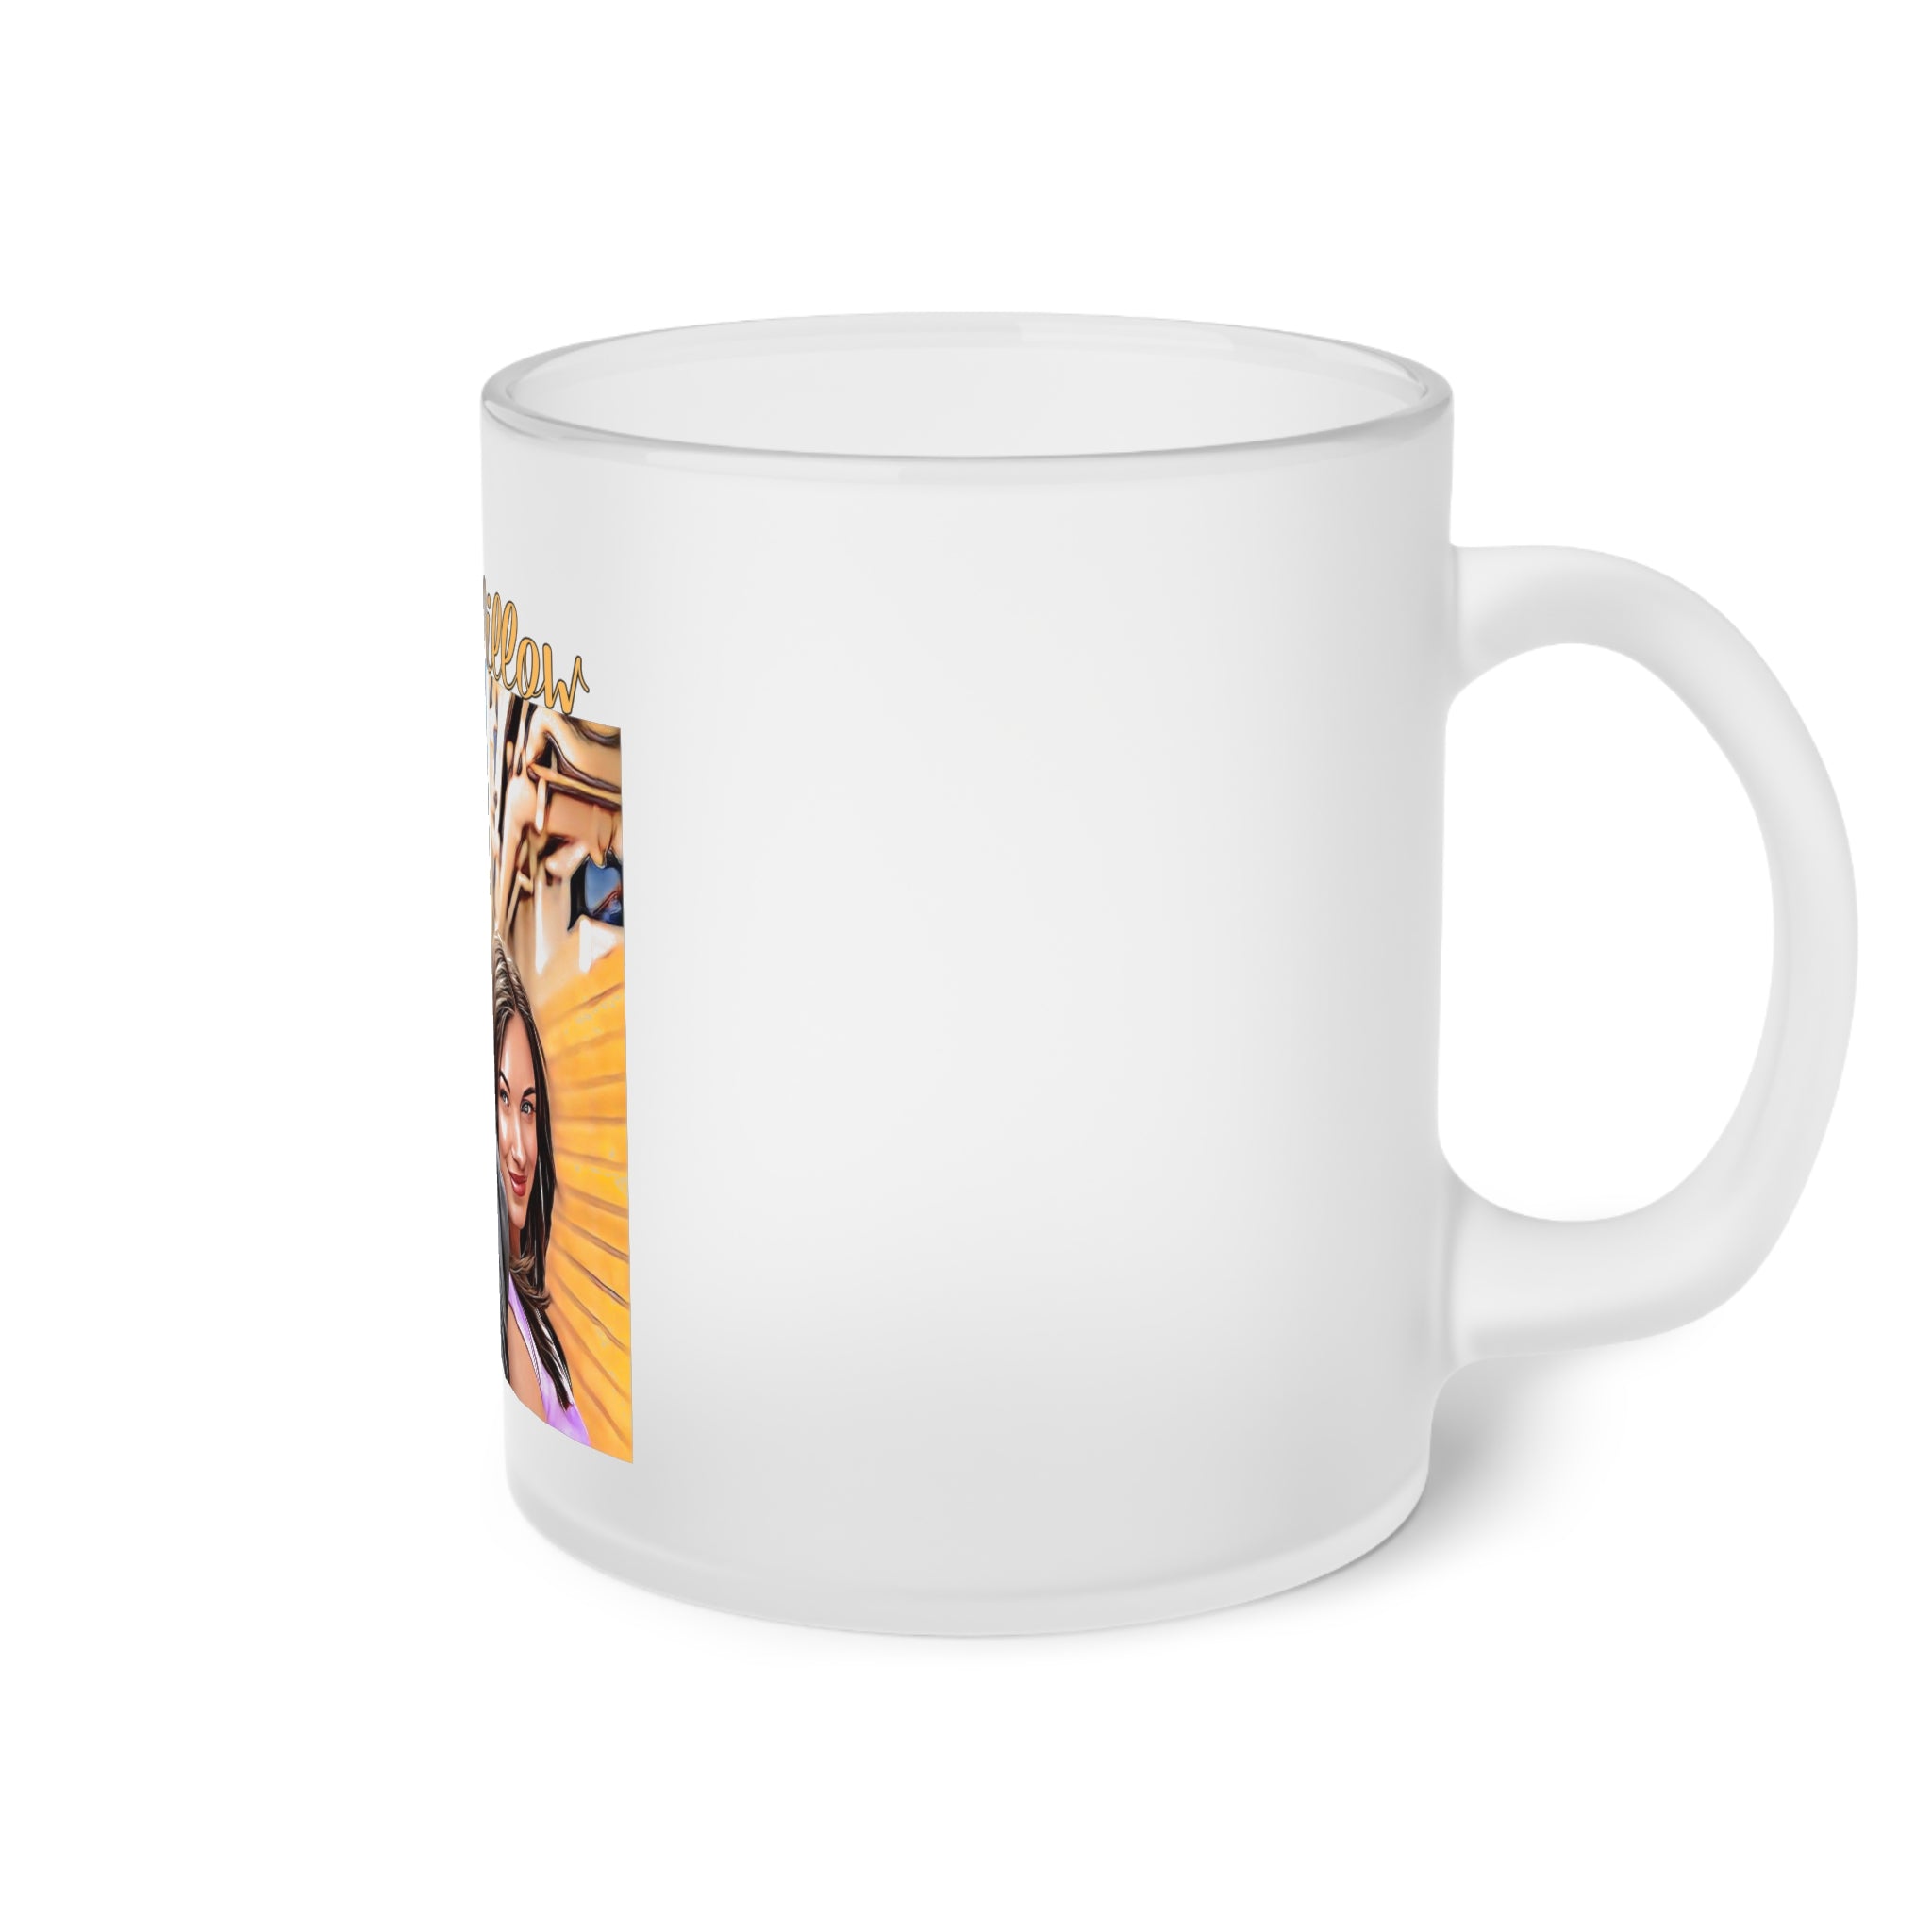 Team Millow Frosted Glass Mug